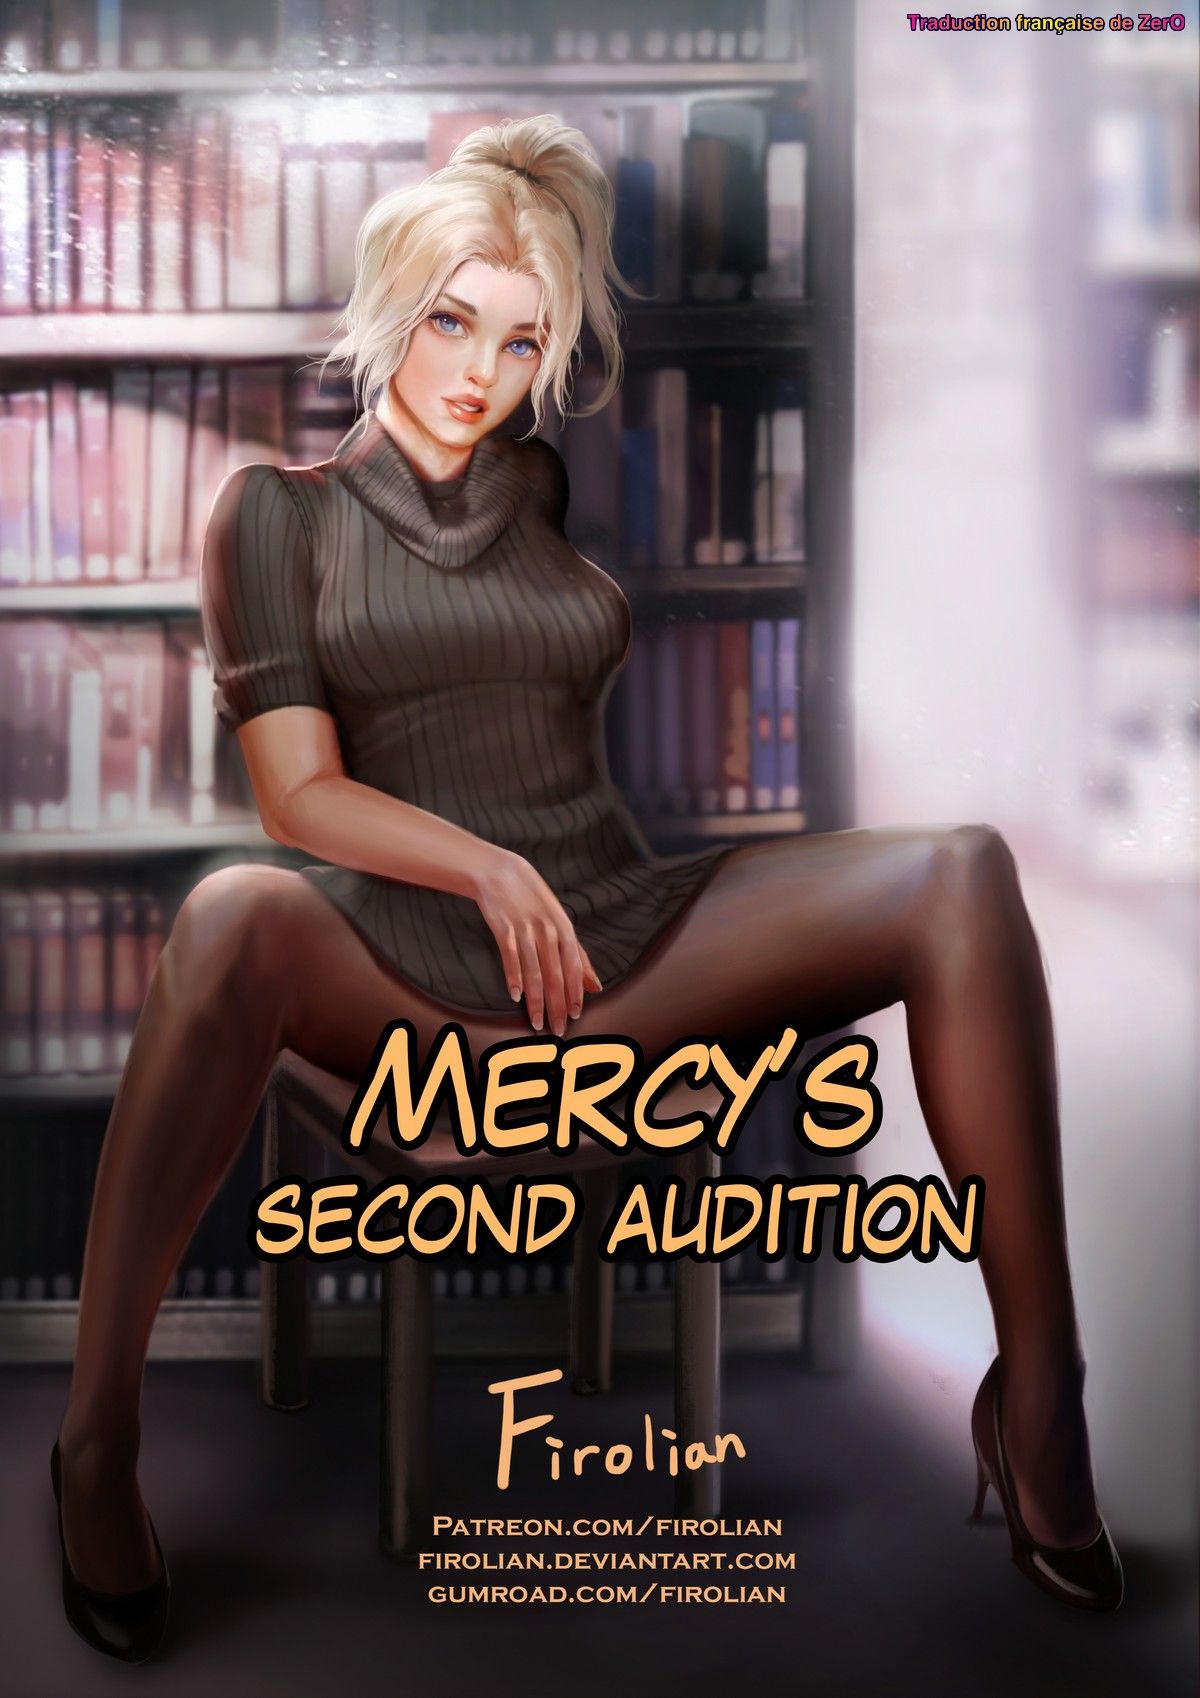 [Firolian] Mercy's second audition [French][Zer0] 1